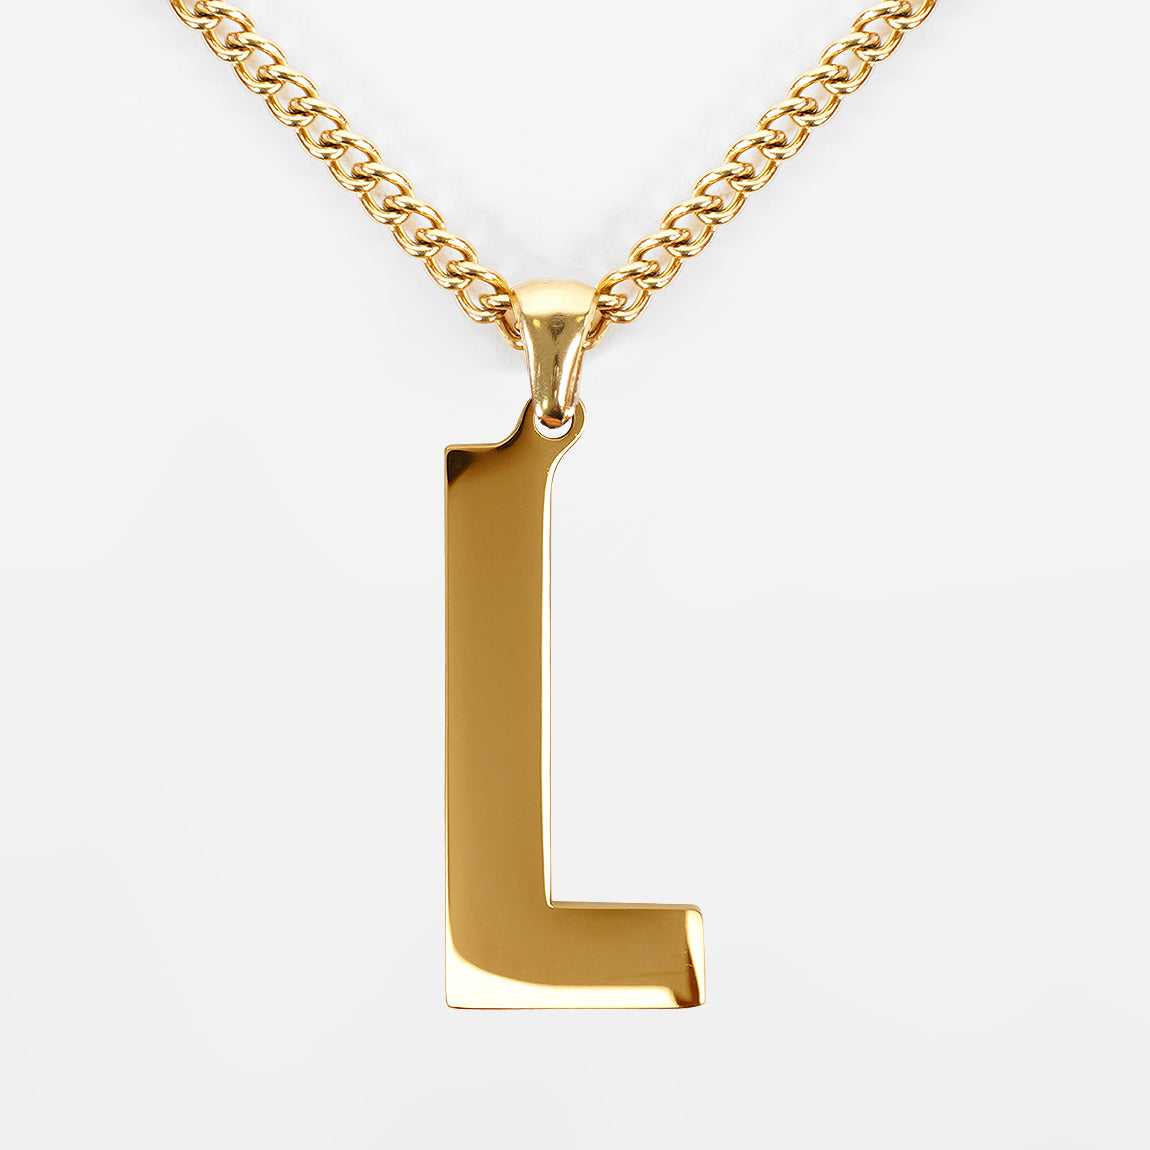 L Letter Pendant with Chain Necklace - Gold Plated Stainless Steel